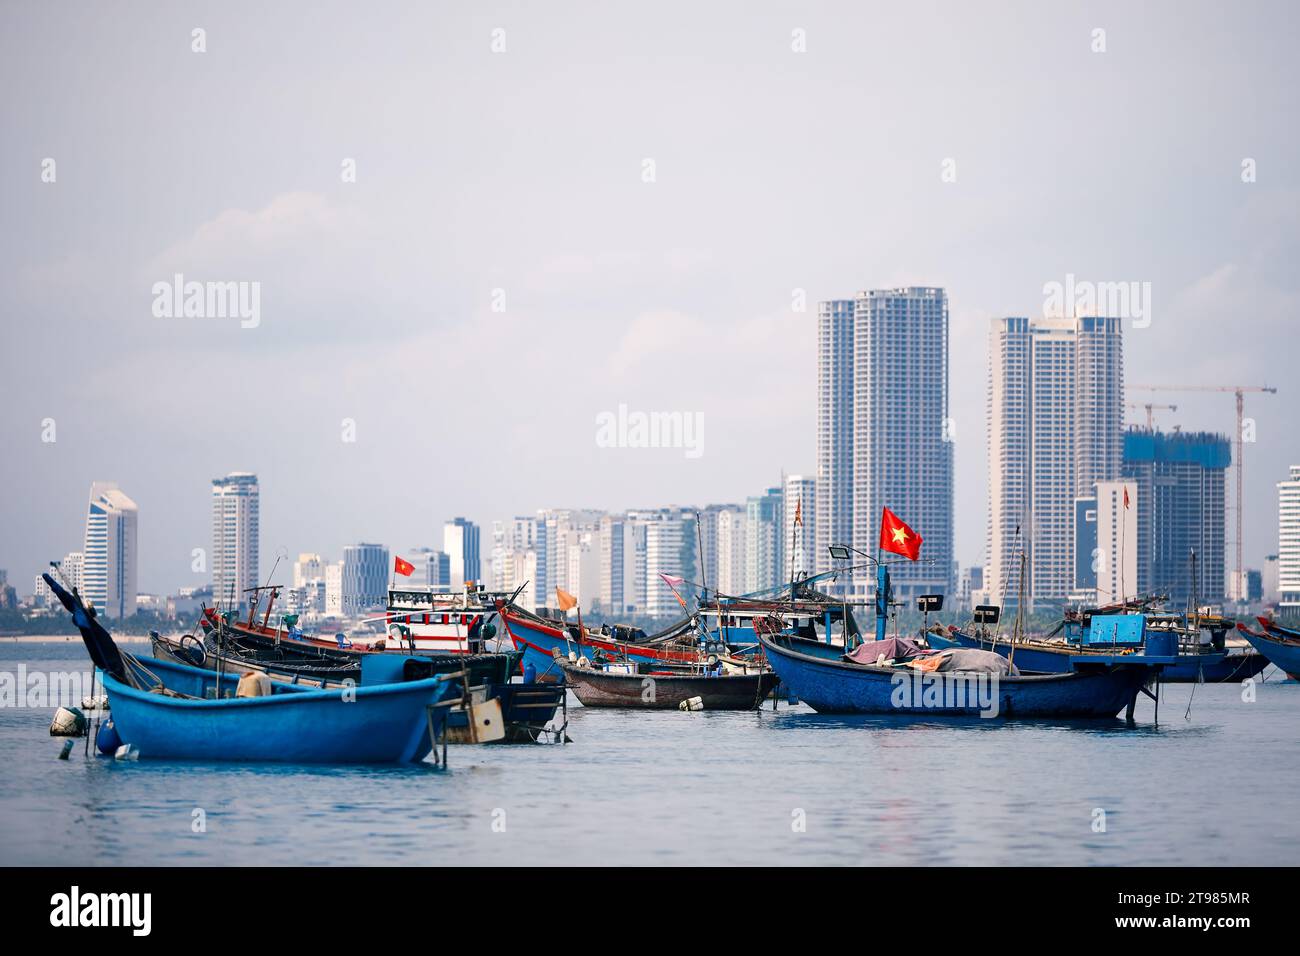 Selective focus on Vietnamese flag on fishing boat moored in port against coast with modern buildings. Da Nang cityscape in Vietnam. Stock Photo